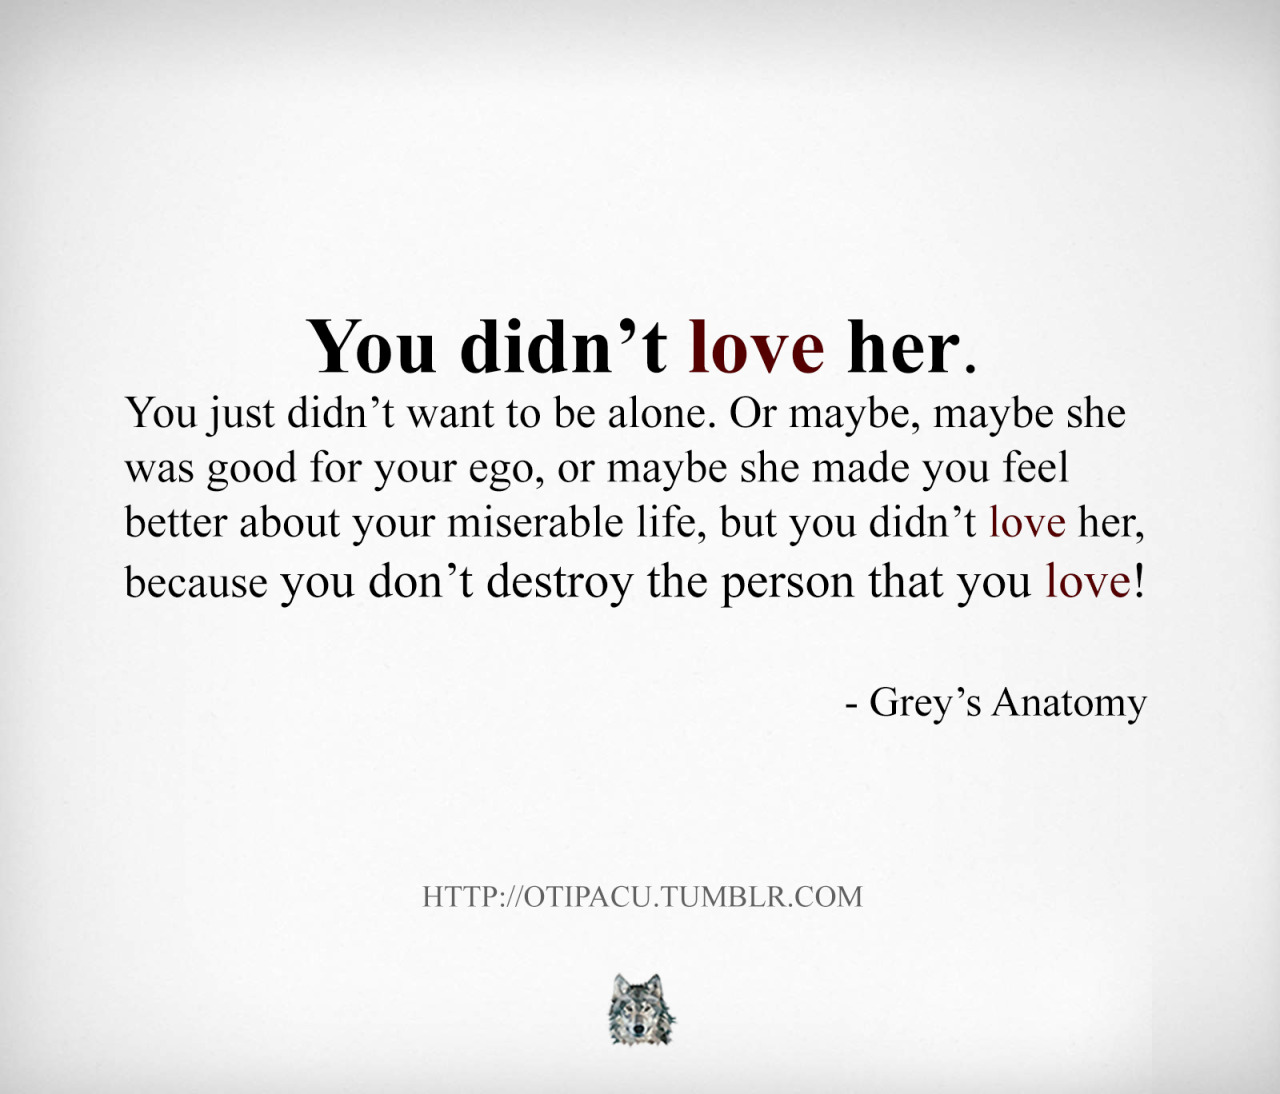 otc otipacu quotes grey s anatomy you didn t love her destroy ego alone miserable life